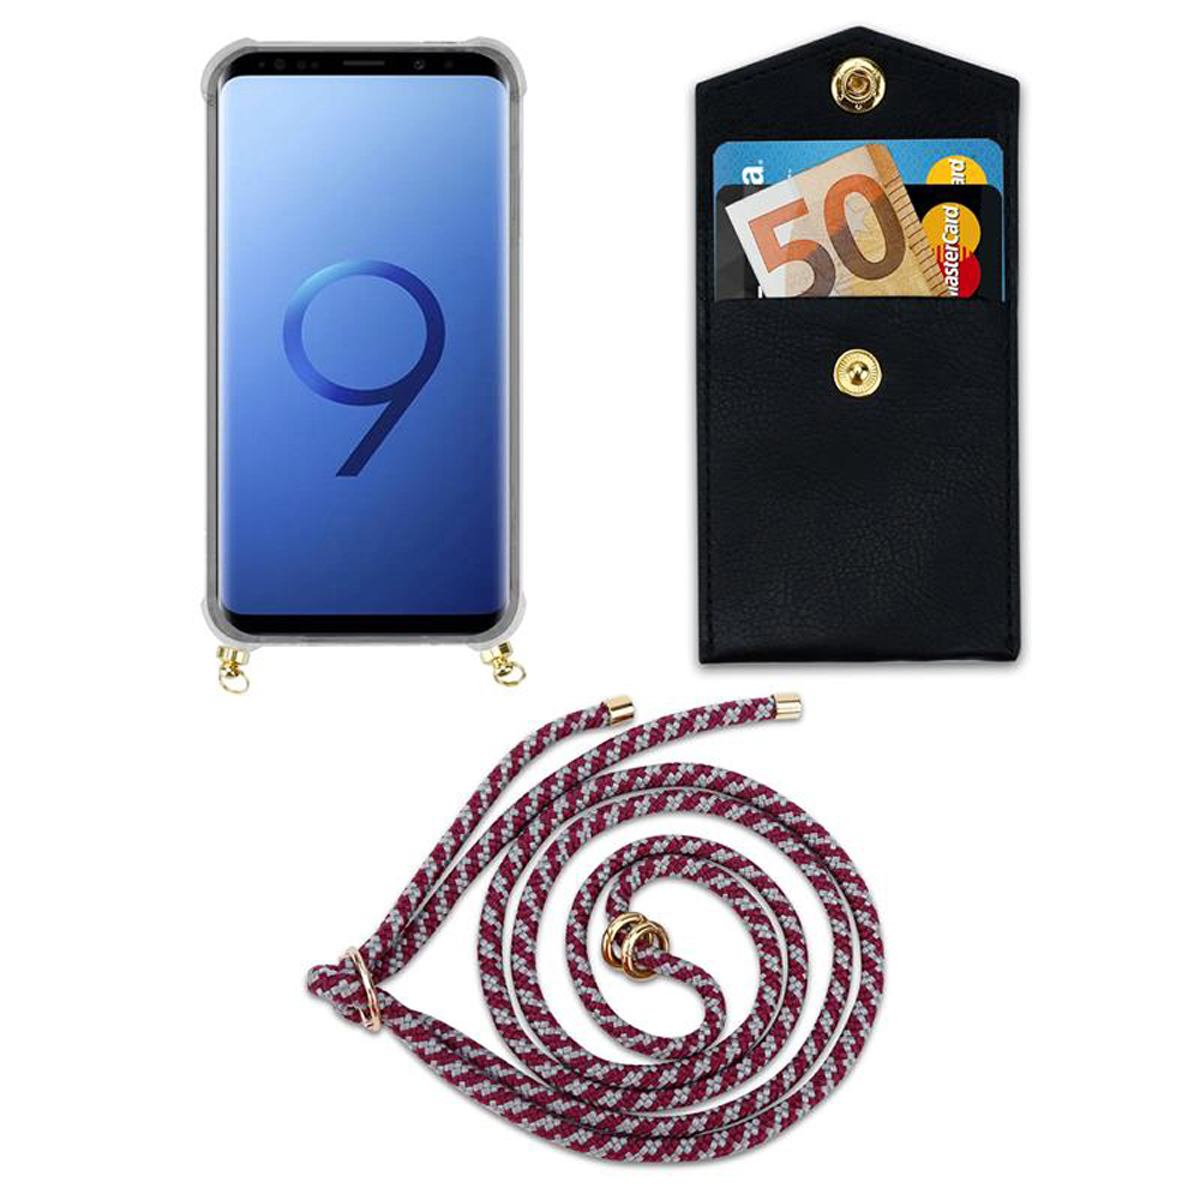 mit PLUS, Ringen, S9 Samsung, ROT Hülle, Gold Handy abnehmbarer Backcover, und Band Galaxy CADORABO Kette WEIß Kordel